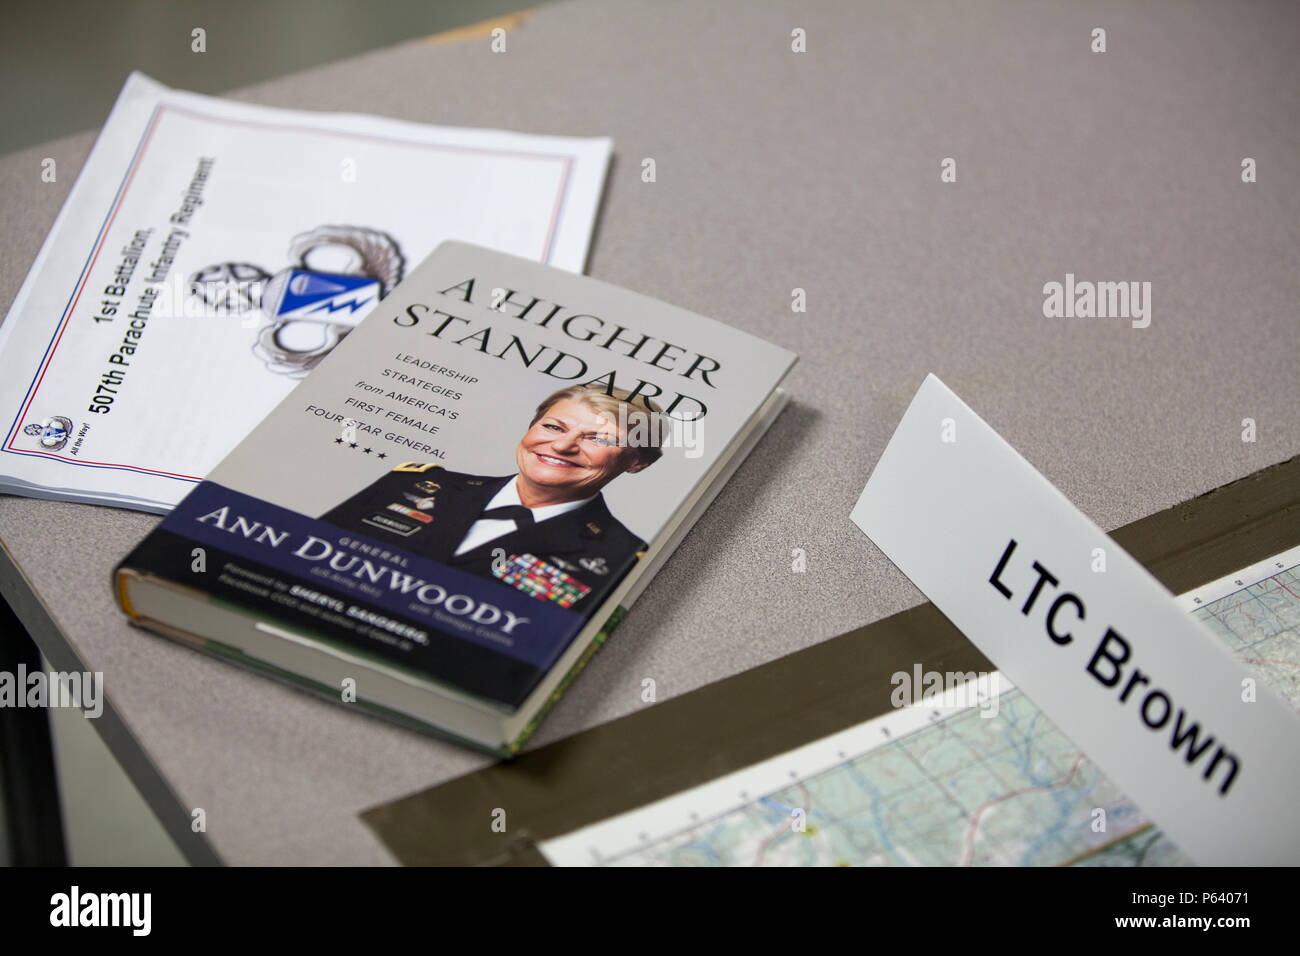 A book written by Retired U.S. Army Gen. Ann E. Dunwoody, sits on display during a brief before the wreath-laying ceremony begins in support of The 39th Annual U.S. Army Airborne Awards Festival, Fort Benning, Ga., April 15, 2016. The 39th Annual Airborne Awards Festival recognizes active duty and retired airborne soldiers of all services. It serves to extend the brotherhood of the airborne ethos. (U.S. Army photo by Spc. Tracy McKithern/Released) Stock Photo